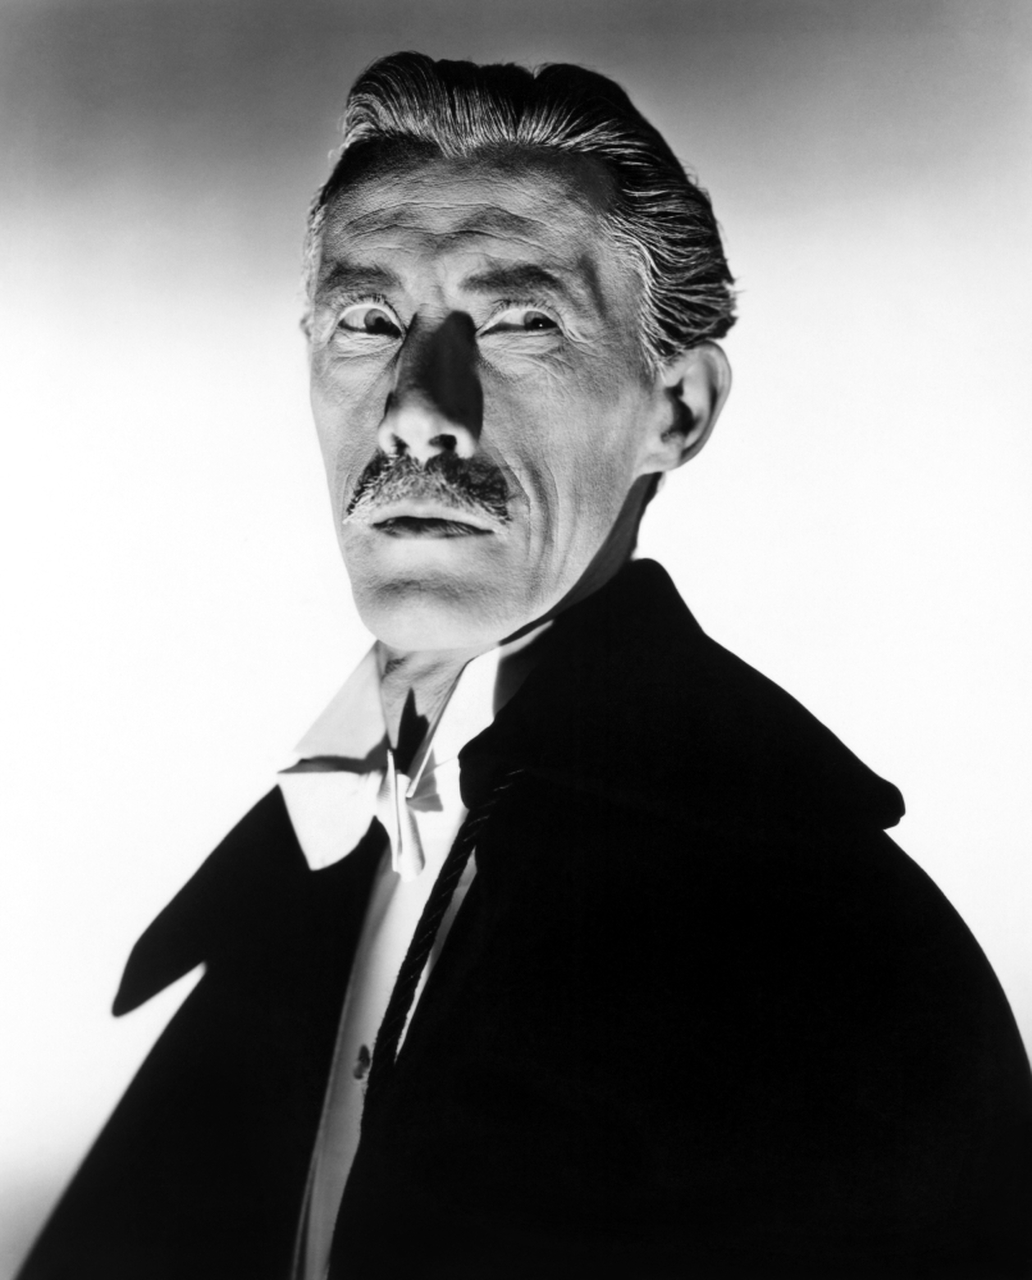 Prolific character actor, who starred as Dracula and in other horror films - JOHN CARRADINE - Castlevania's real-life JONE CANDIES.